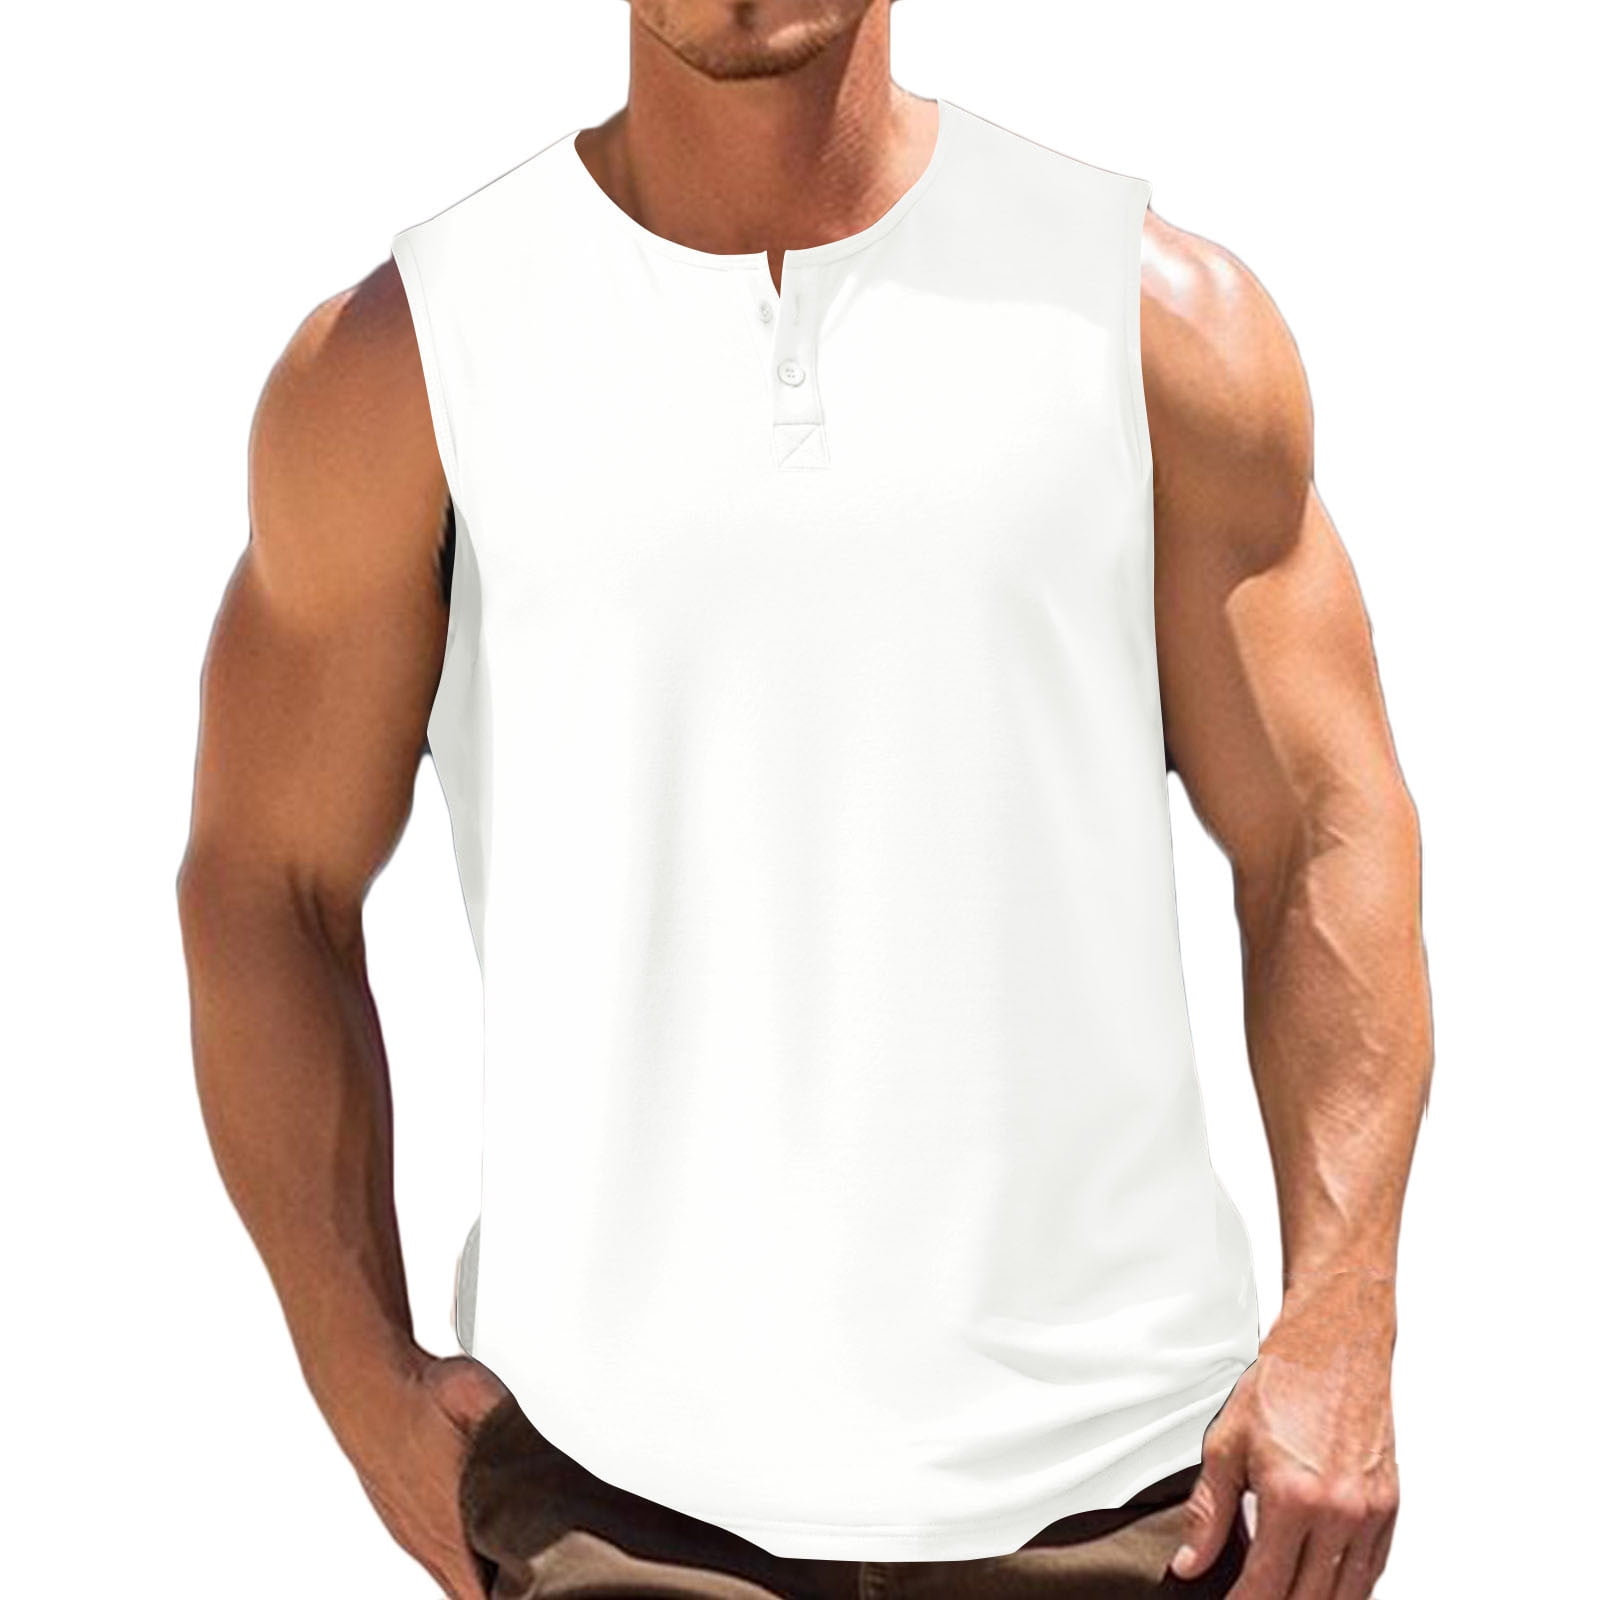 Abomasnow Men's Tank Top Sleeveless Muscle T-shirt Breathable ...